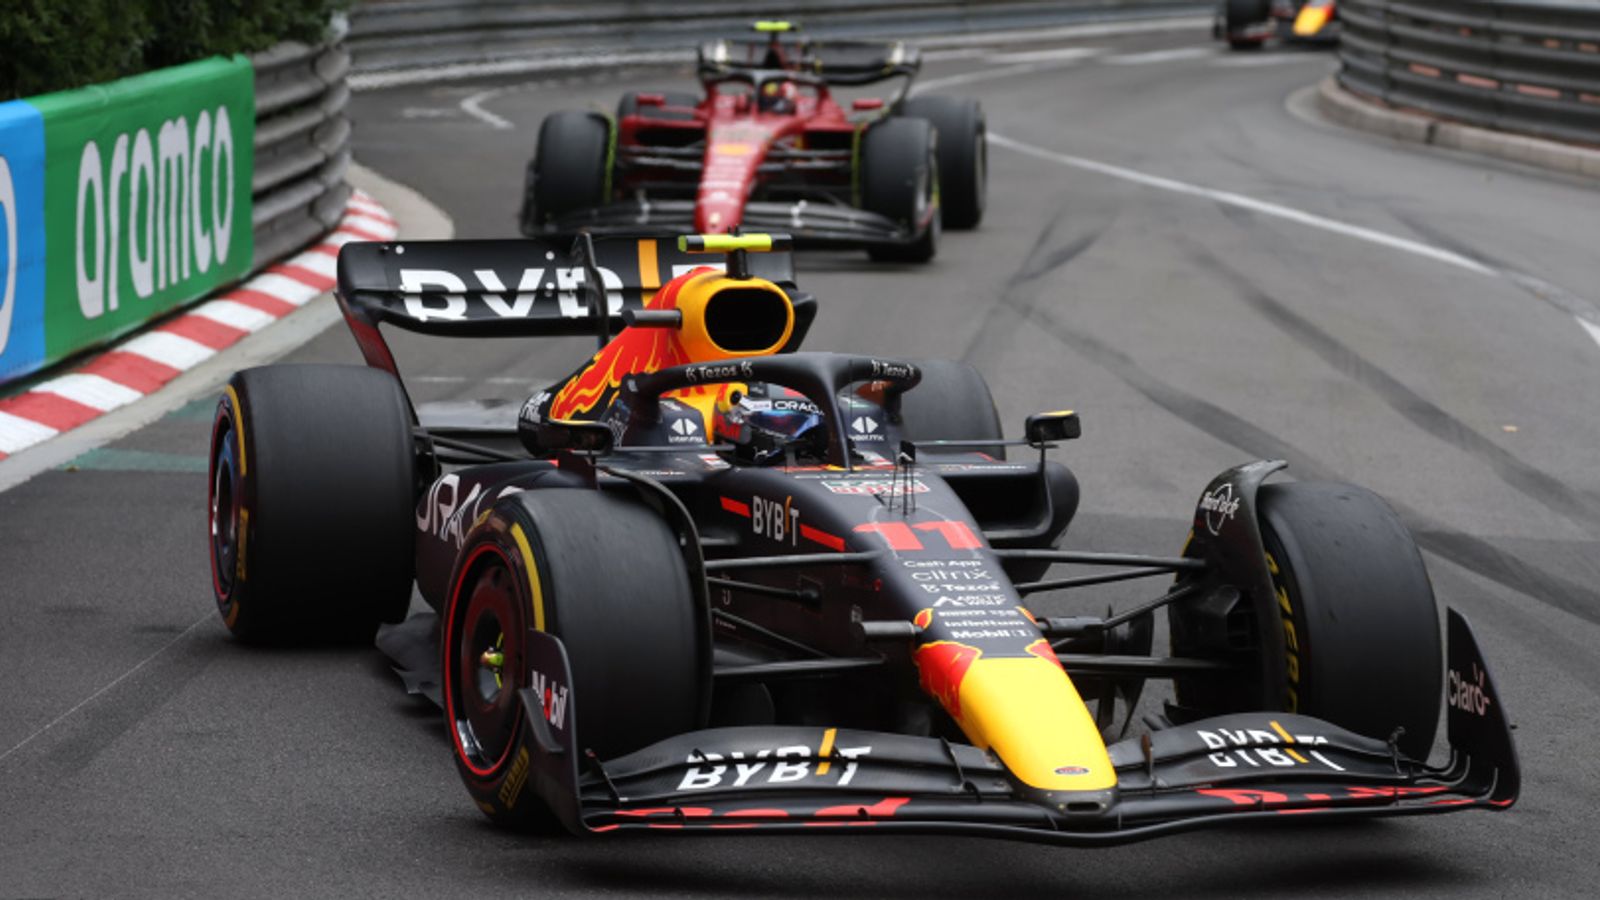 Formula 1 bouncing rule changes ‘negative’ for Mercedes and ‘advantageous’ for Red Bull, says Ted Kravitz